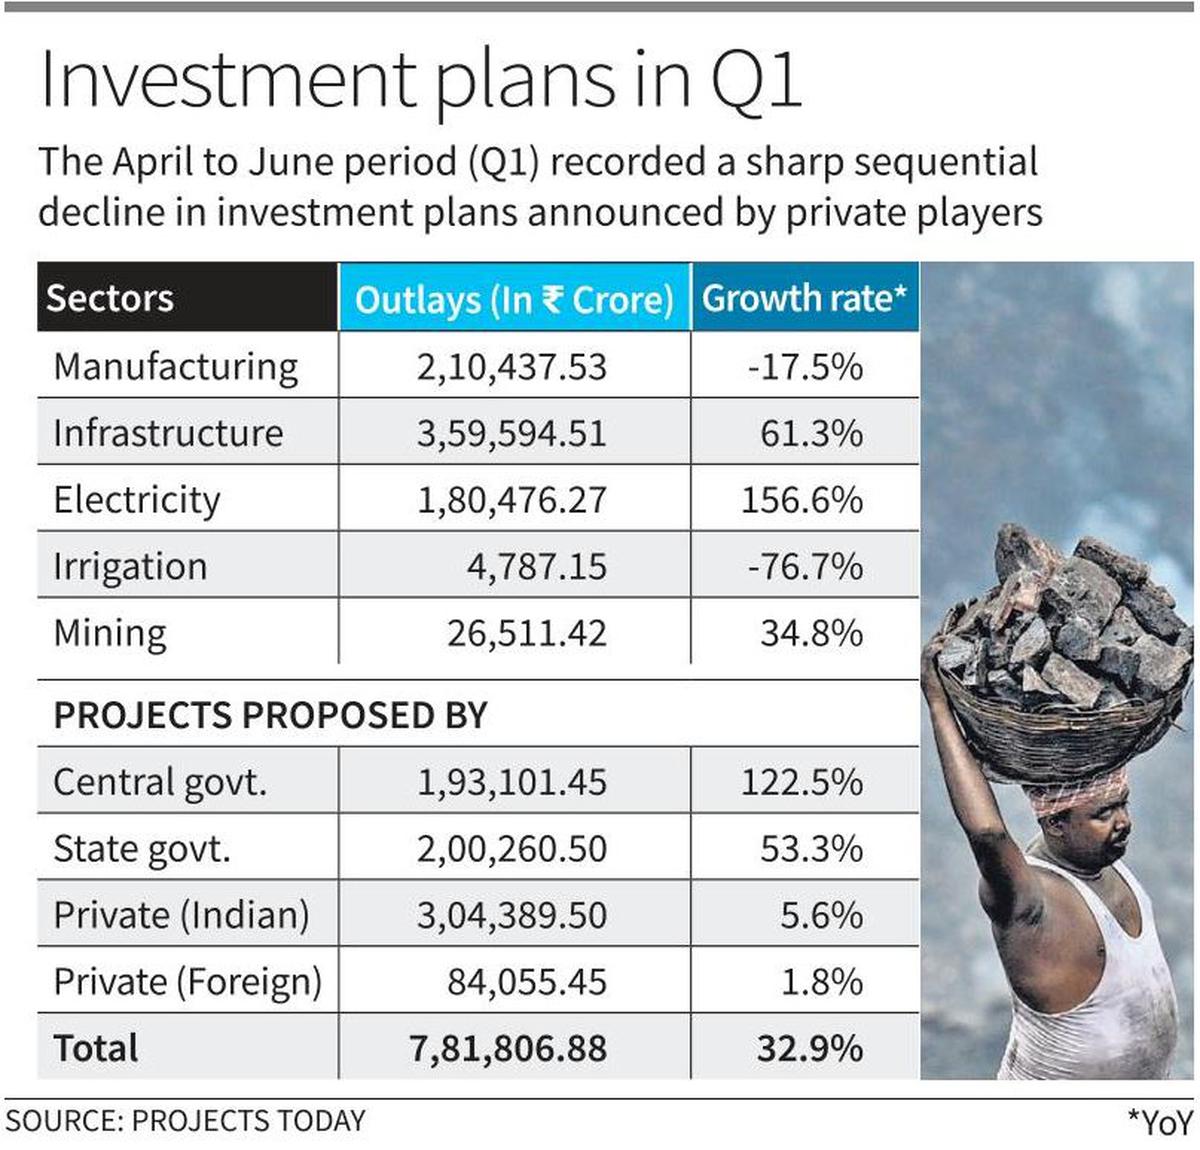 An infographic by Projects Today representing the investment plans announced by private sectors in Quarter 1. 